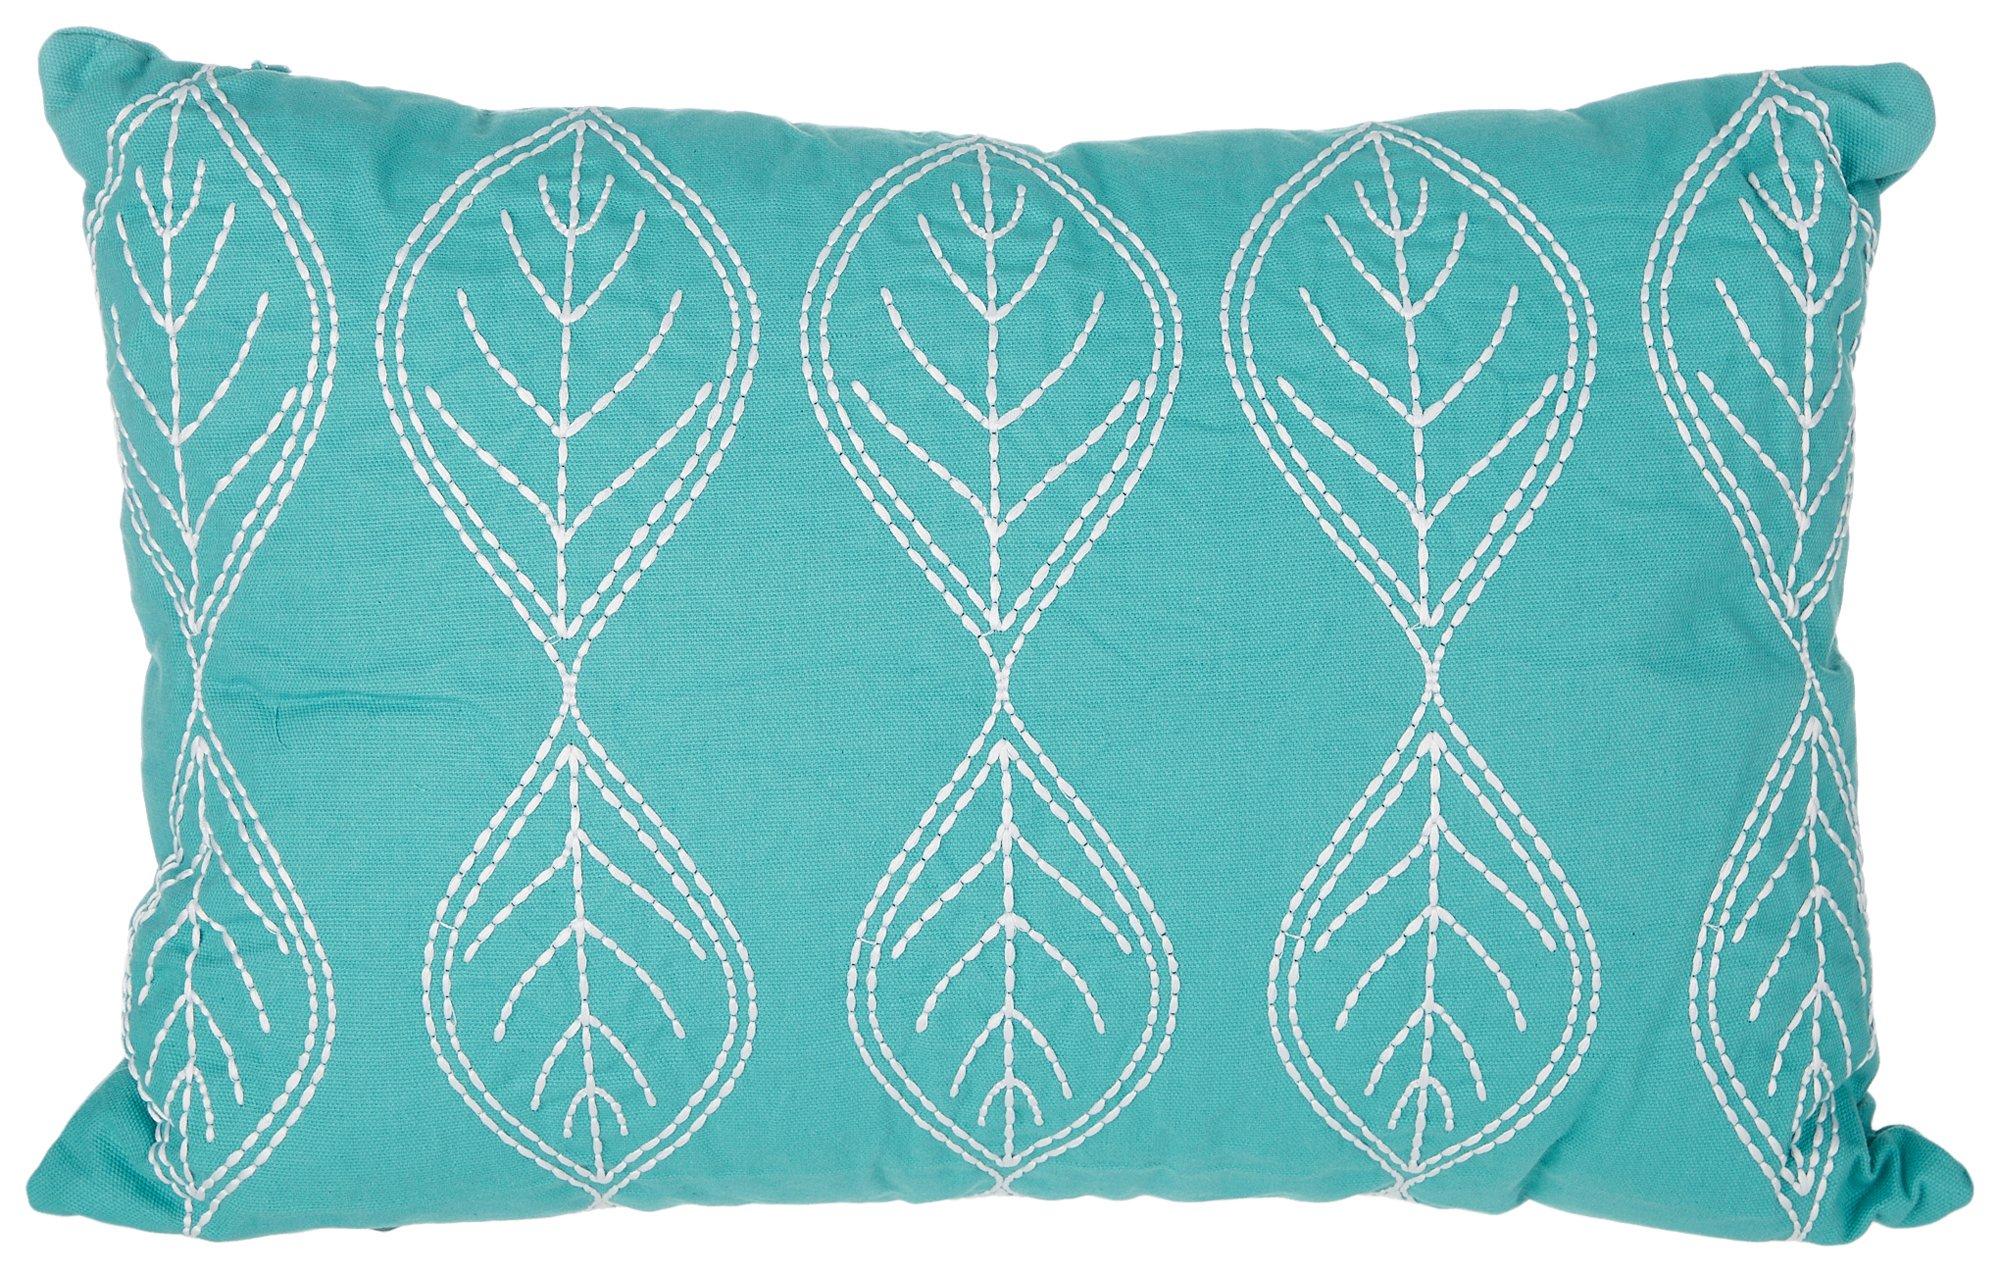 Coastal Home 14x20 Stitched Leaves Decorative Pillow